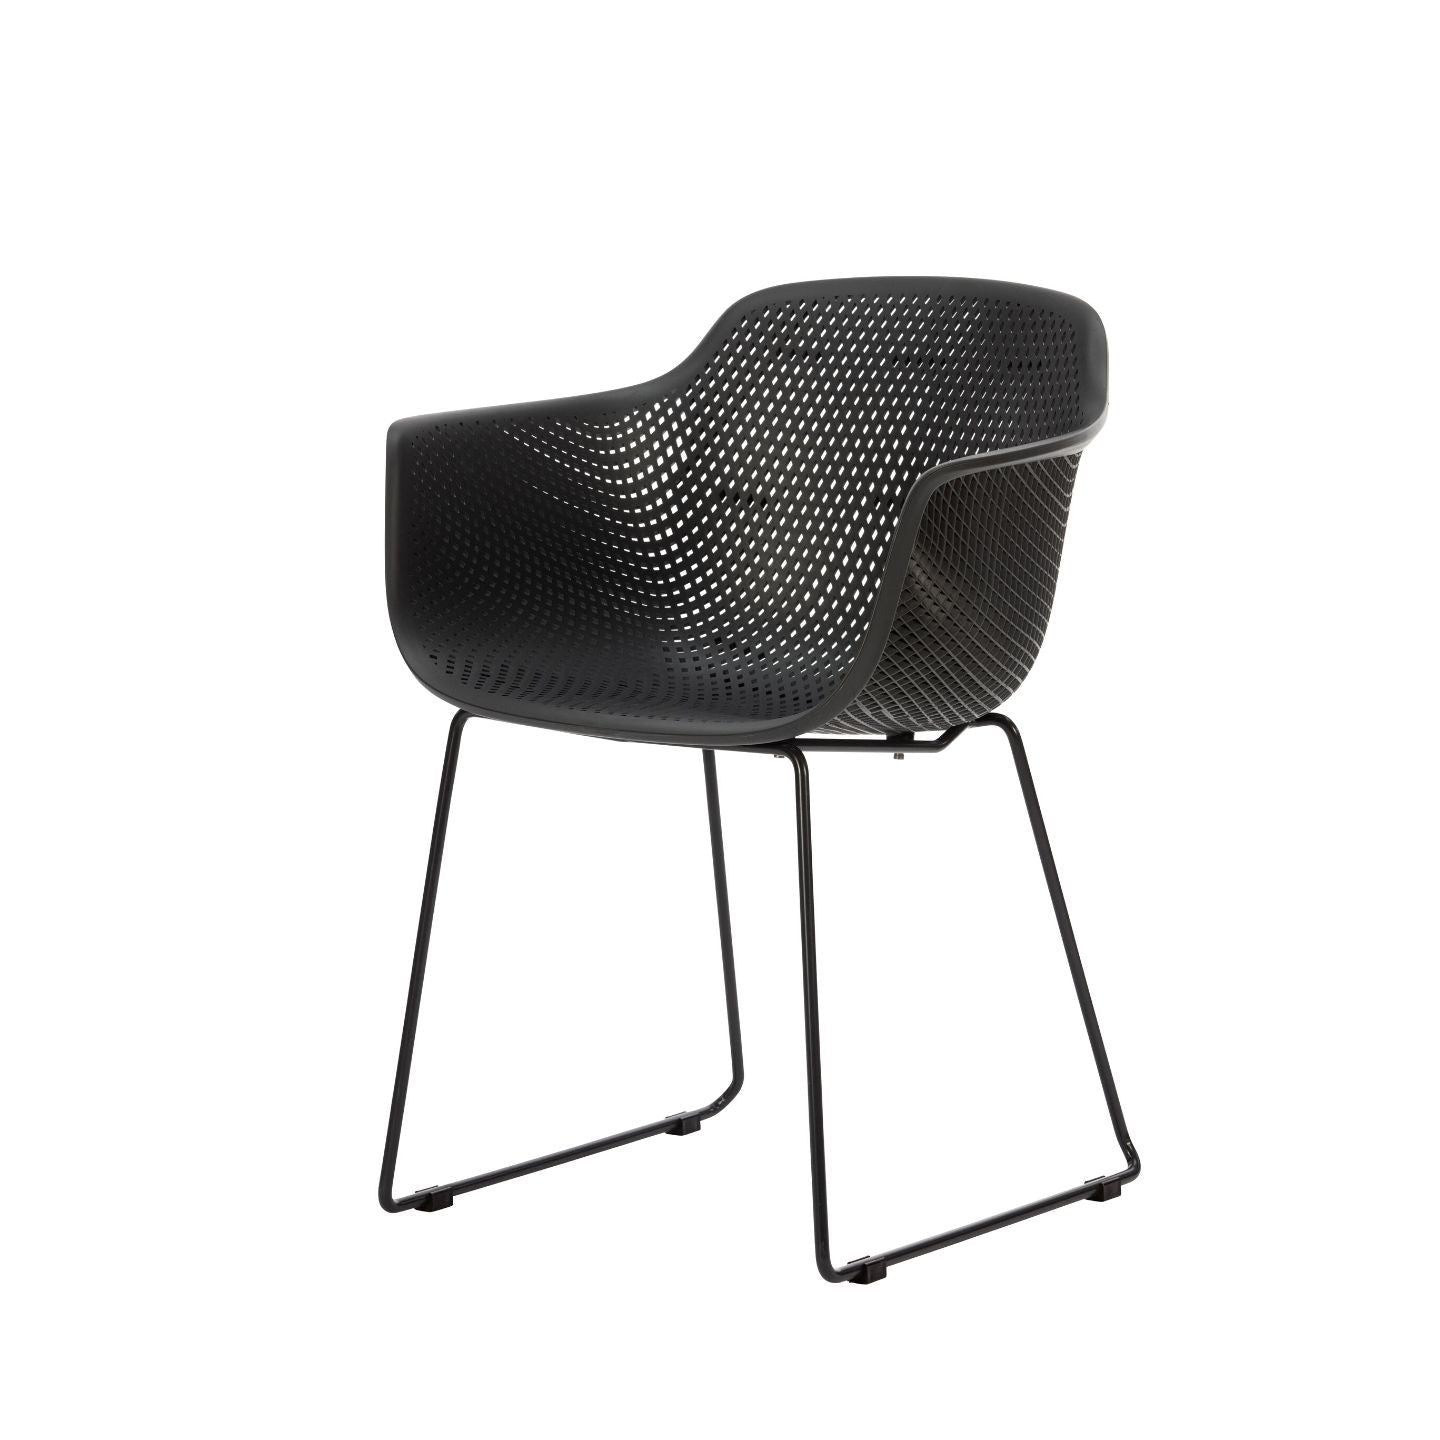 Lily Outdoor Resin Chair